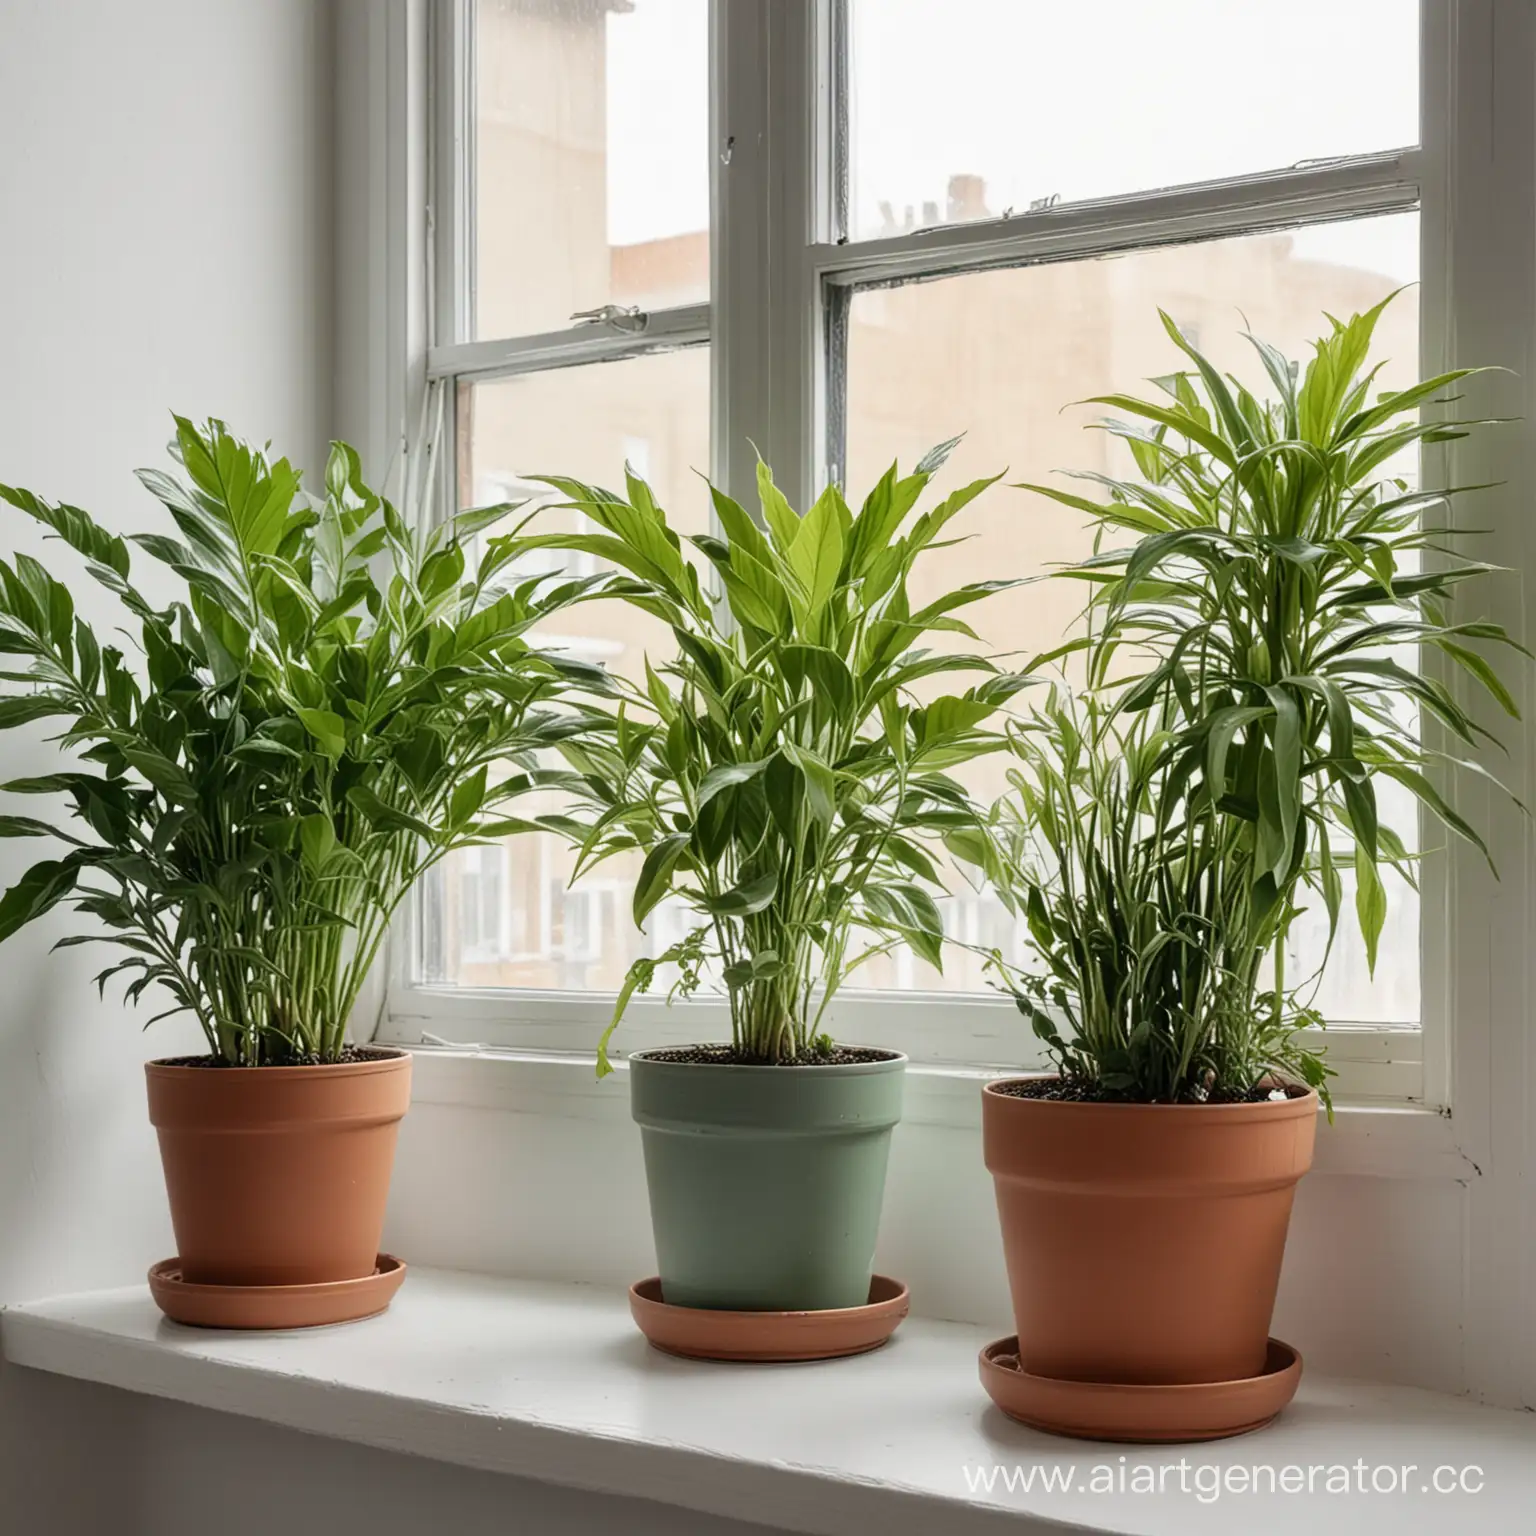 Assorted-Green-Potted-Plants-Arranged-Neatly-by-the-Window